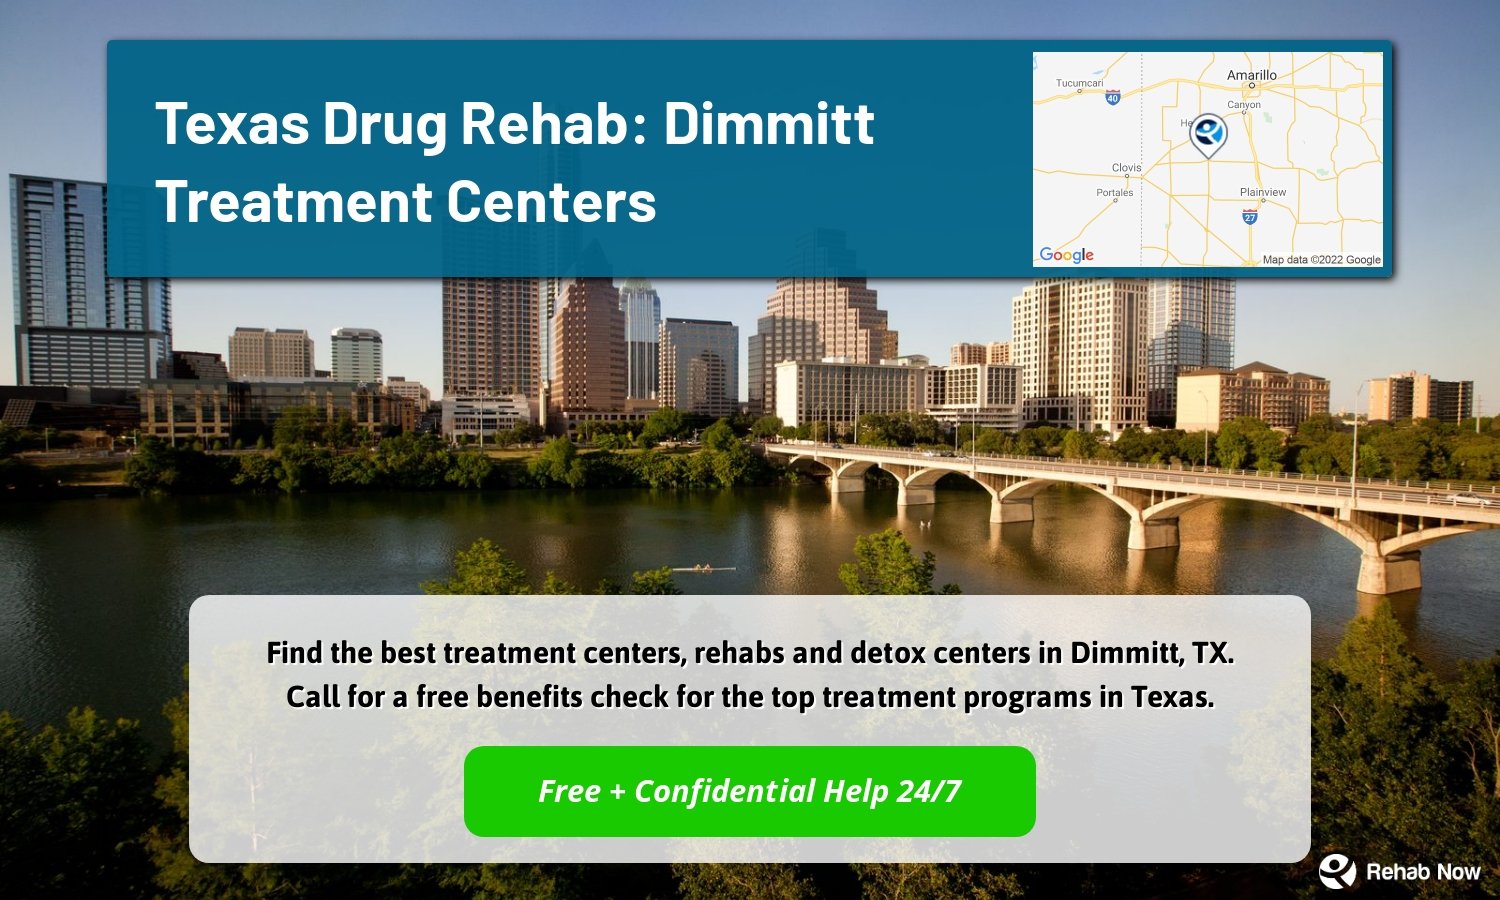 Find the best treatment centers, rehabs and detox centers in Dimmitt, TX. Call for a free benefits check for the top treatment programs in Texas.